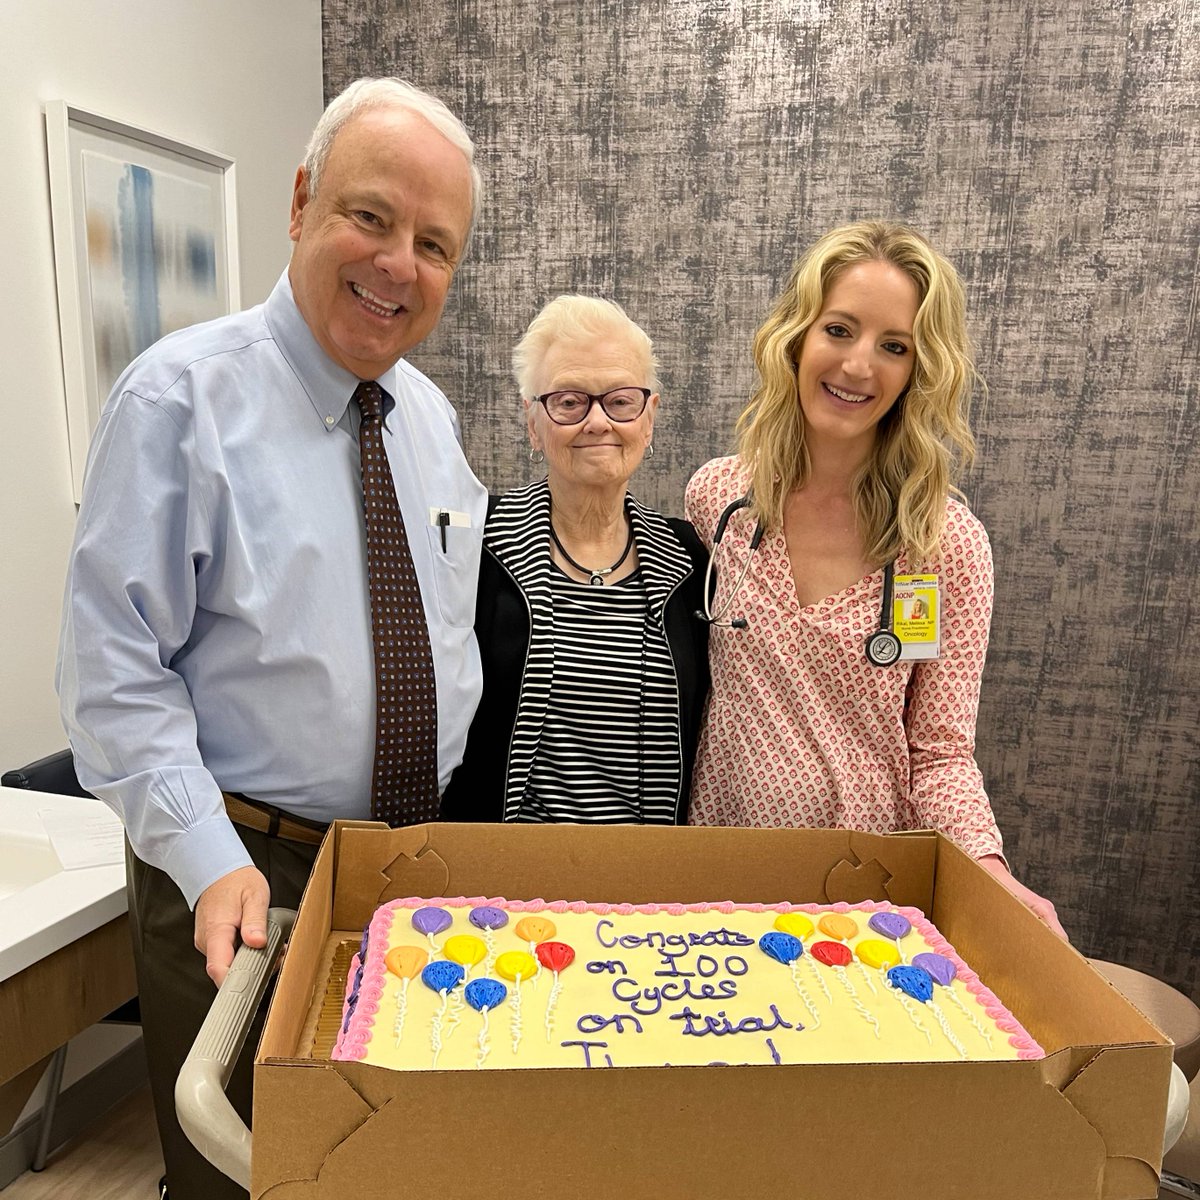 Join us in celebrating Theresa’s 100th month on her phase 1 clinical trial. The care team at SCRI in Nashville surprised her with a cake to honor this incredible moment.